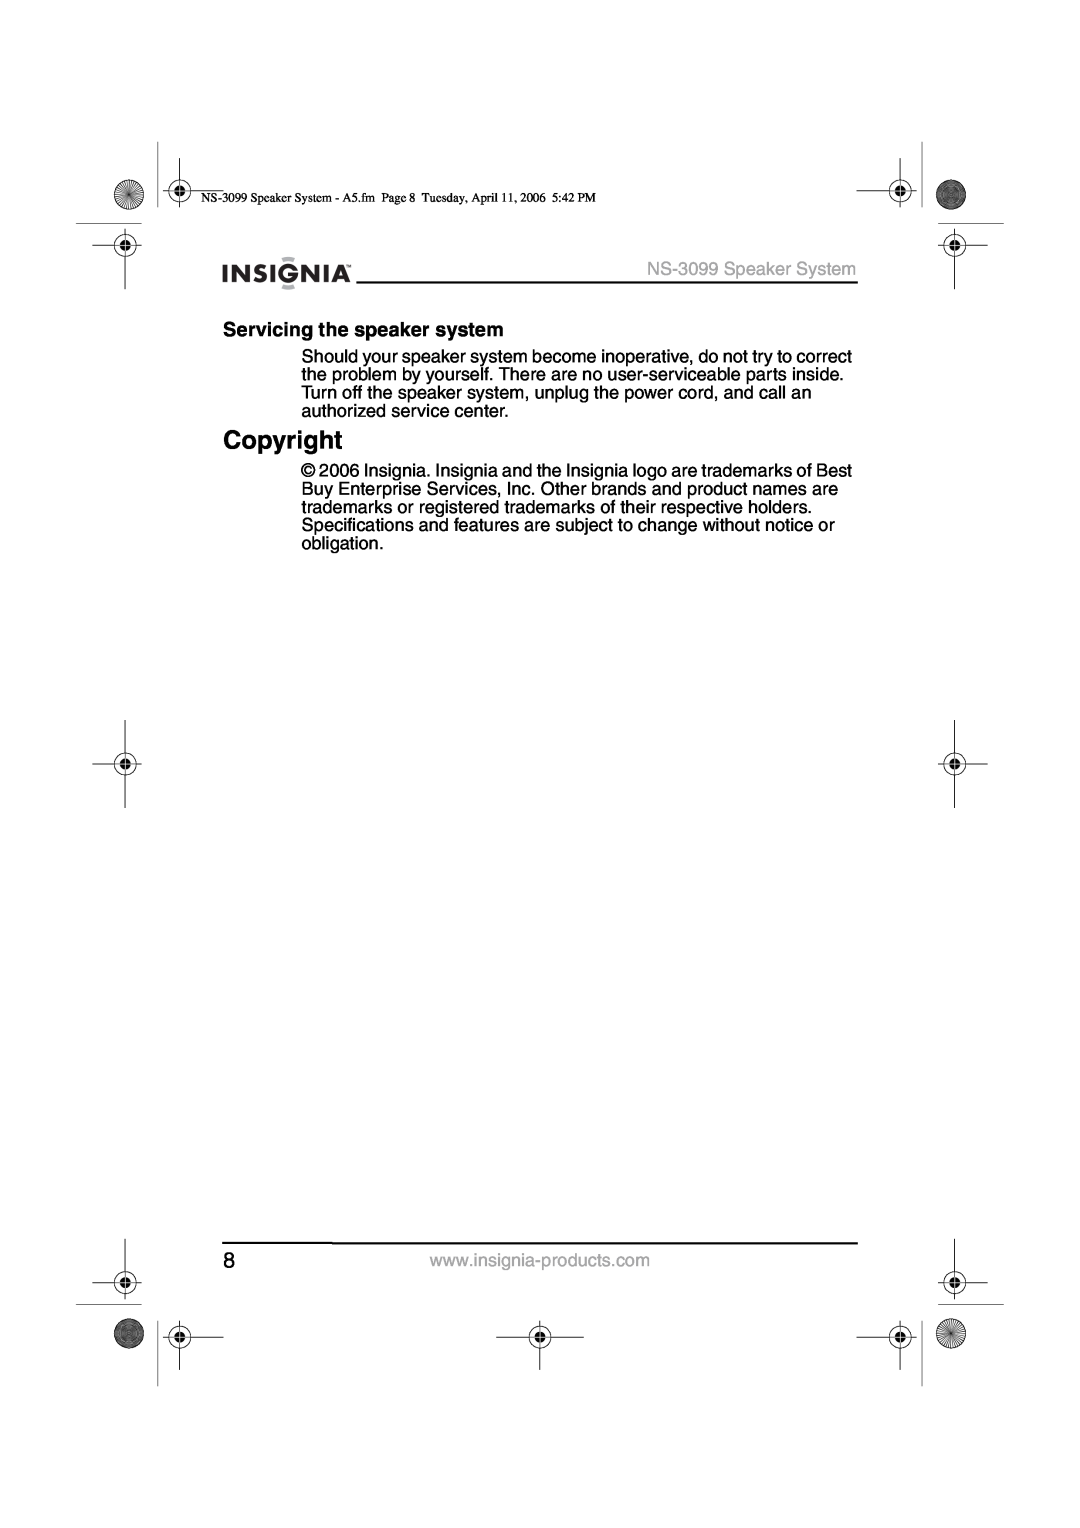 Insignia manual Copyright, Servicing the speaker system, NS-3099Speaker System 